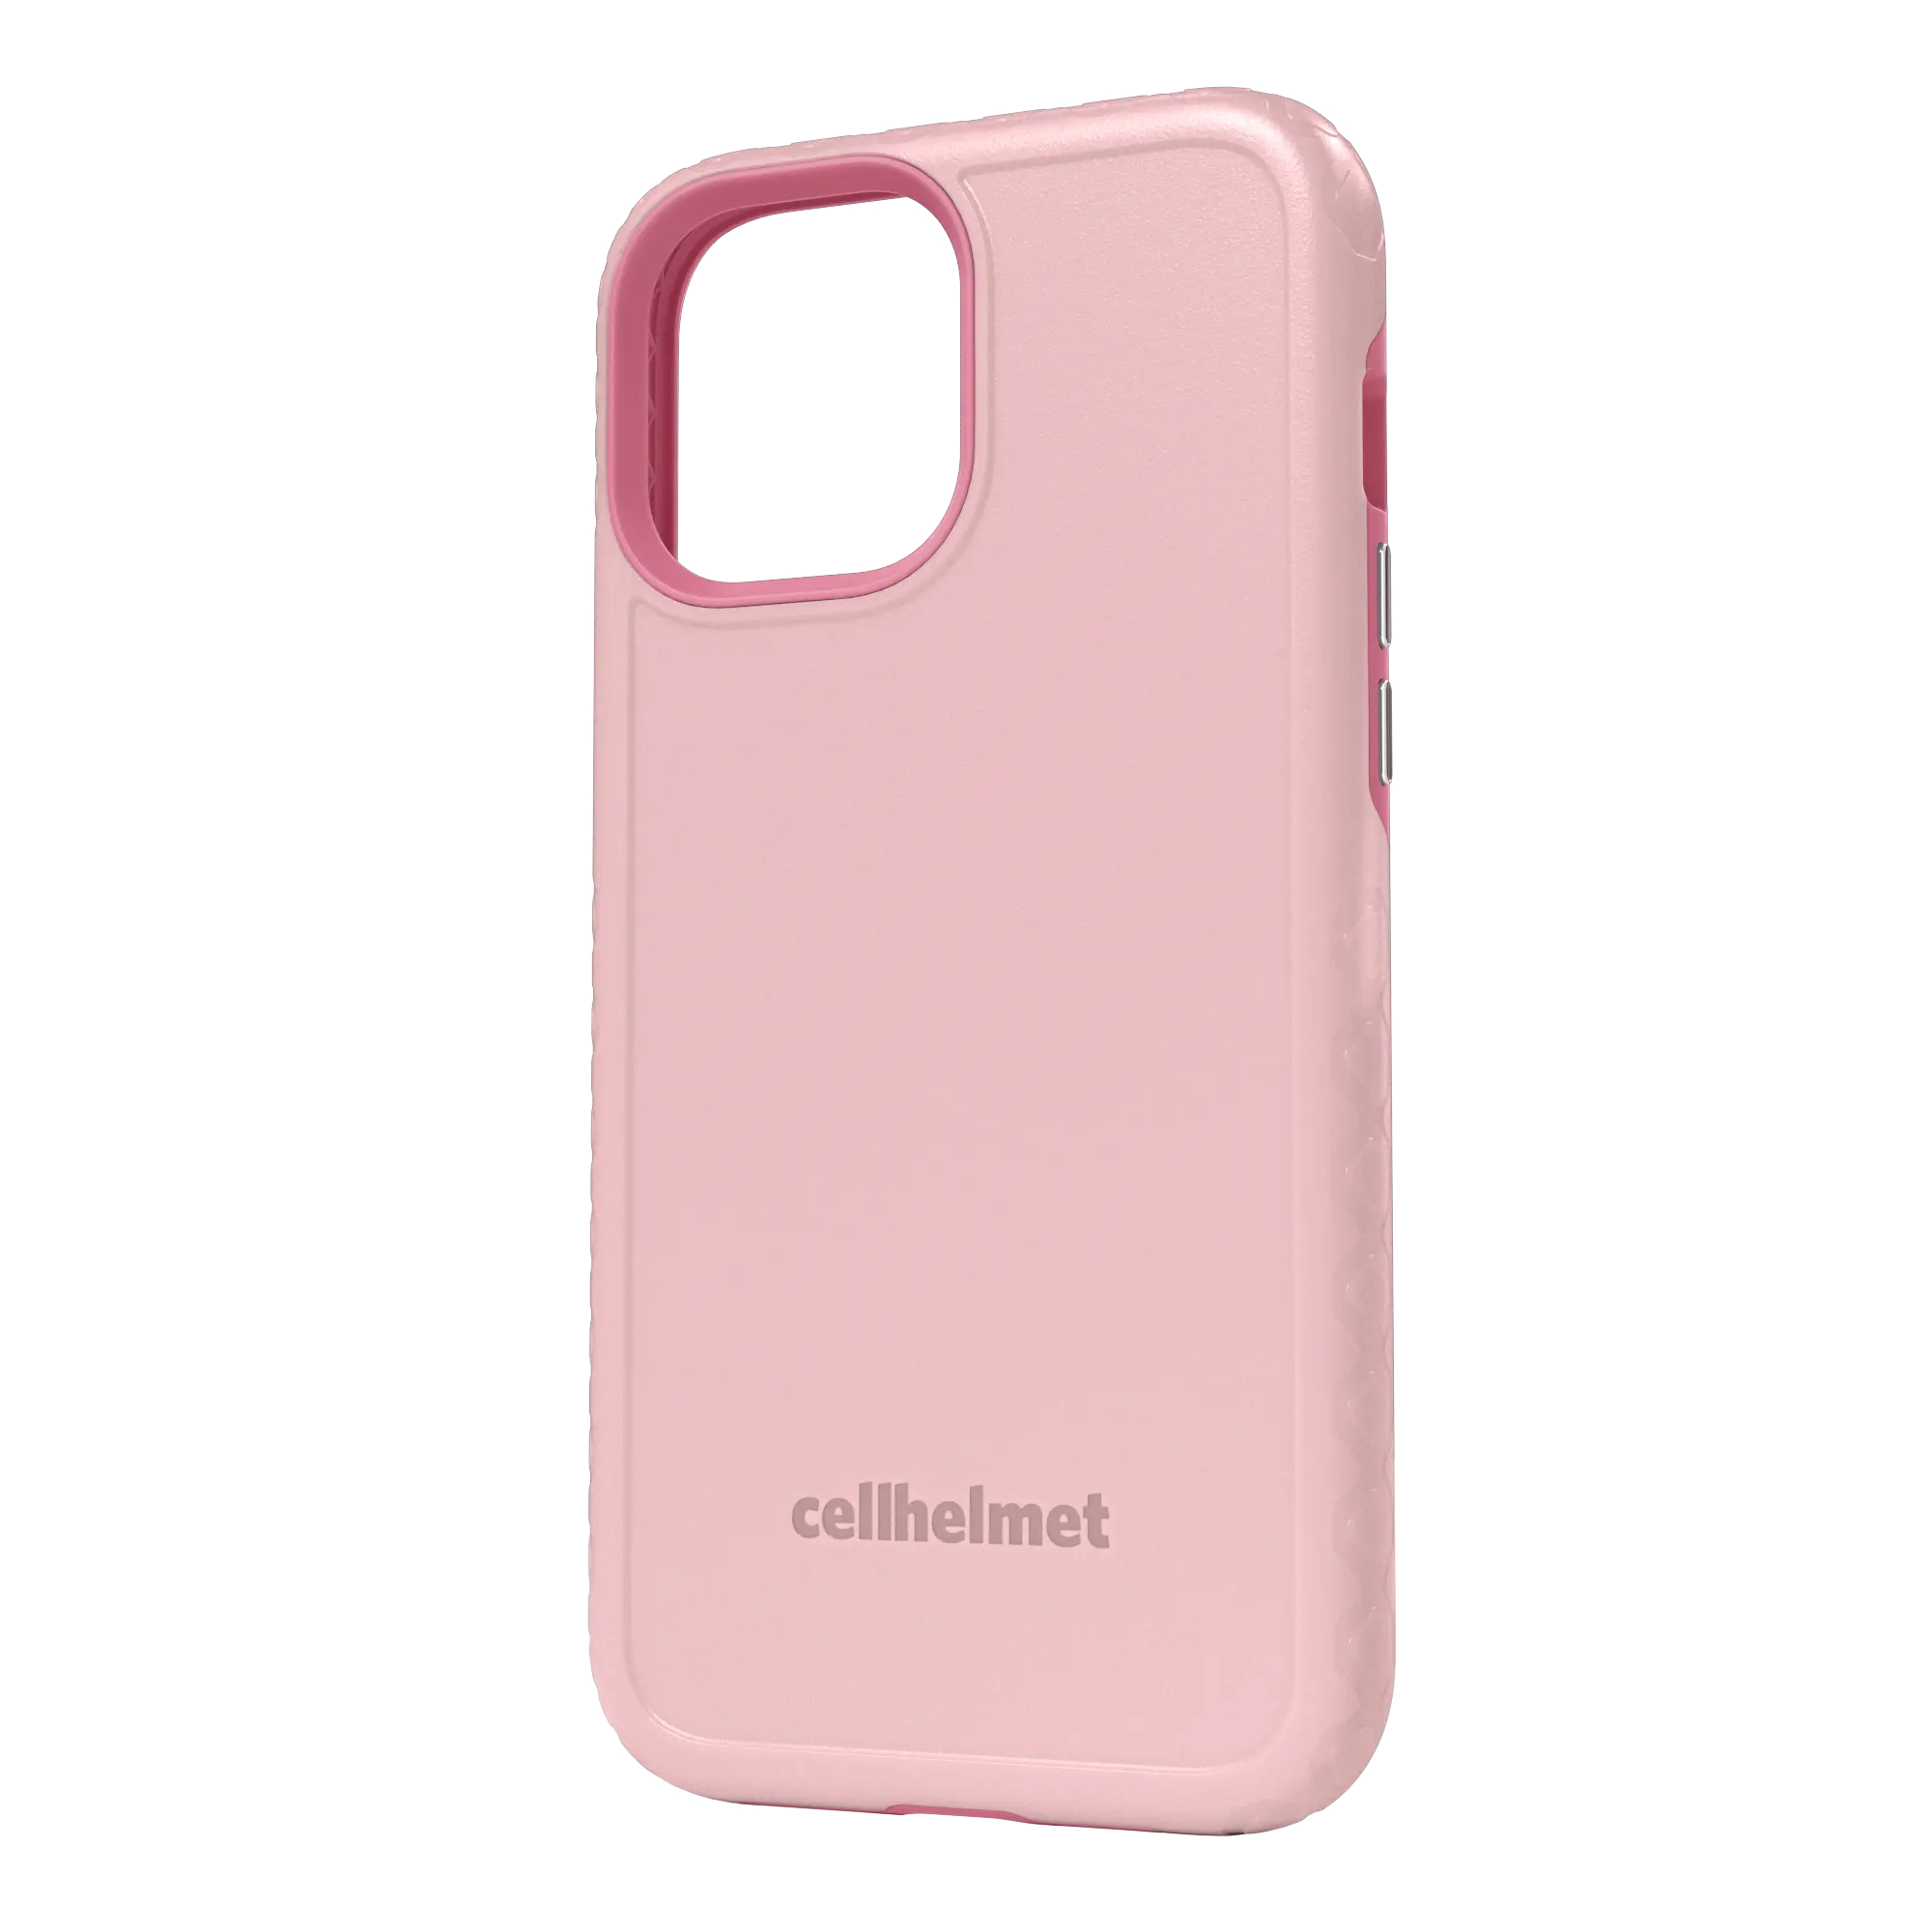 Pink cellhelmet Personalized Case for iPhone 12 Pro Max